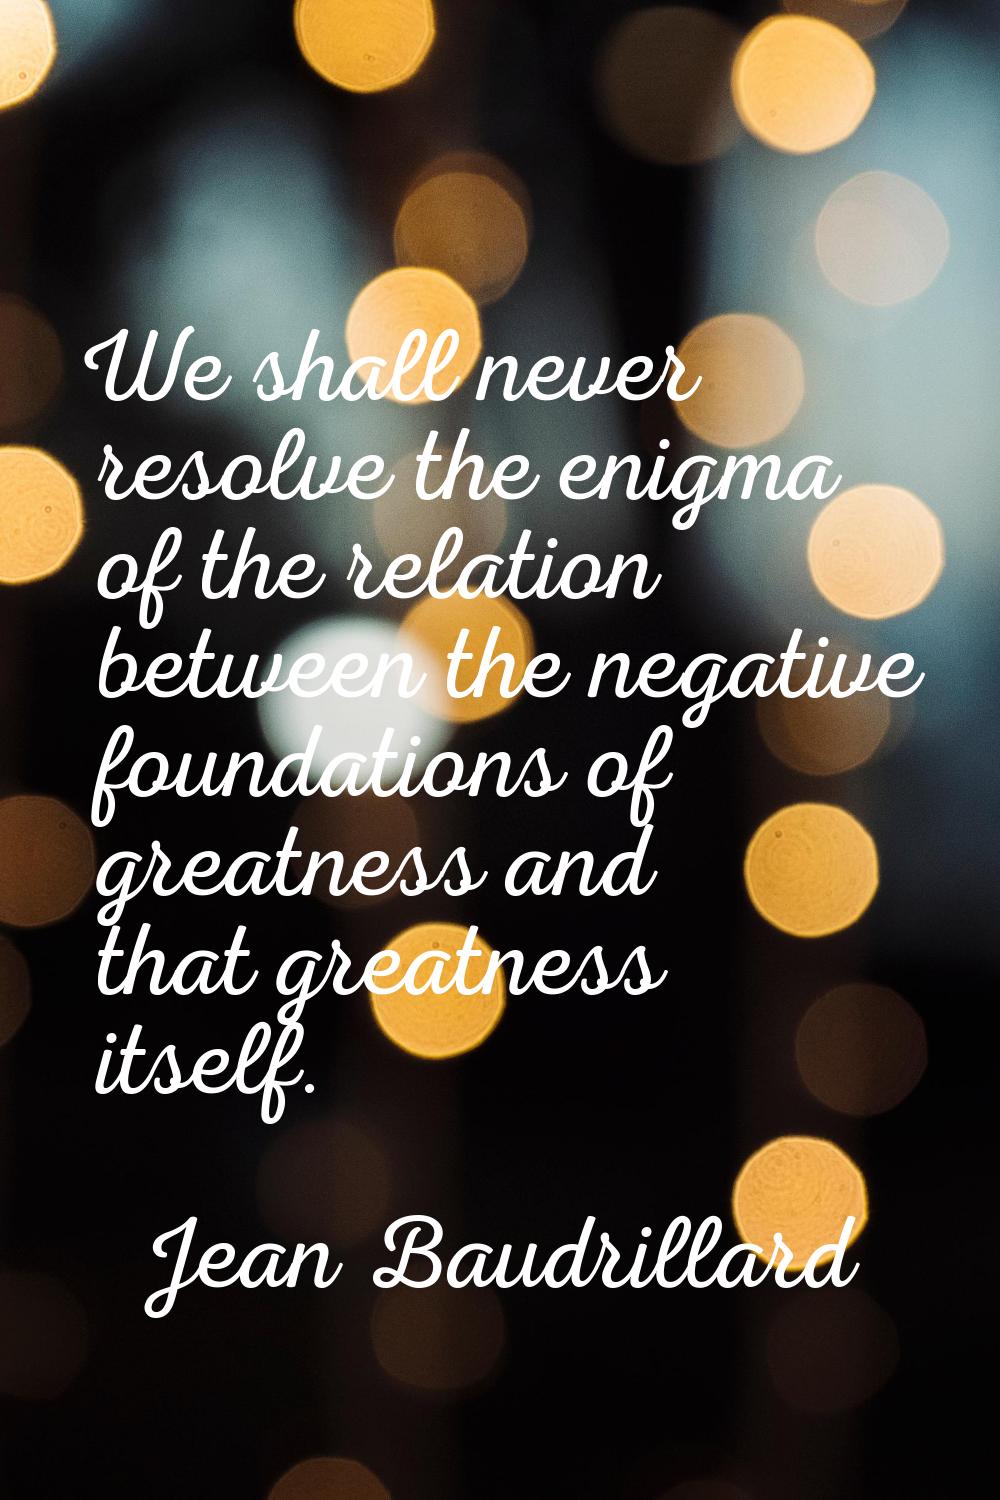 We shall never resolve the enigma of the relation between the negative foundations of greatness and